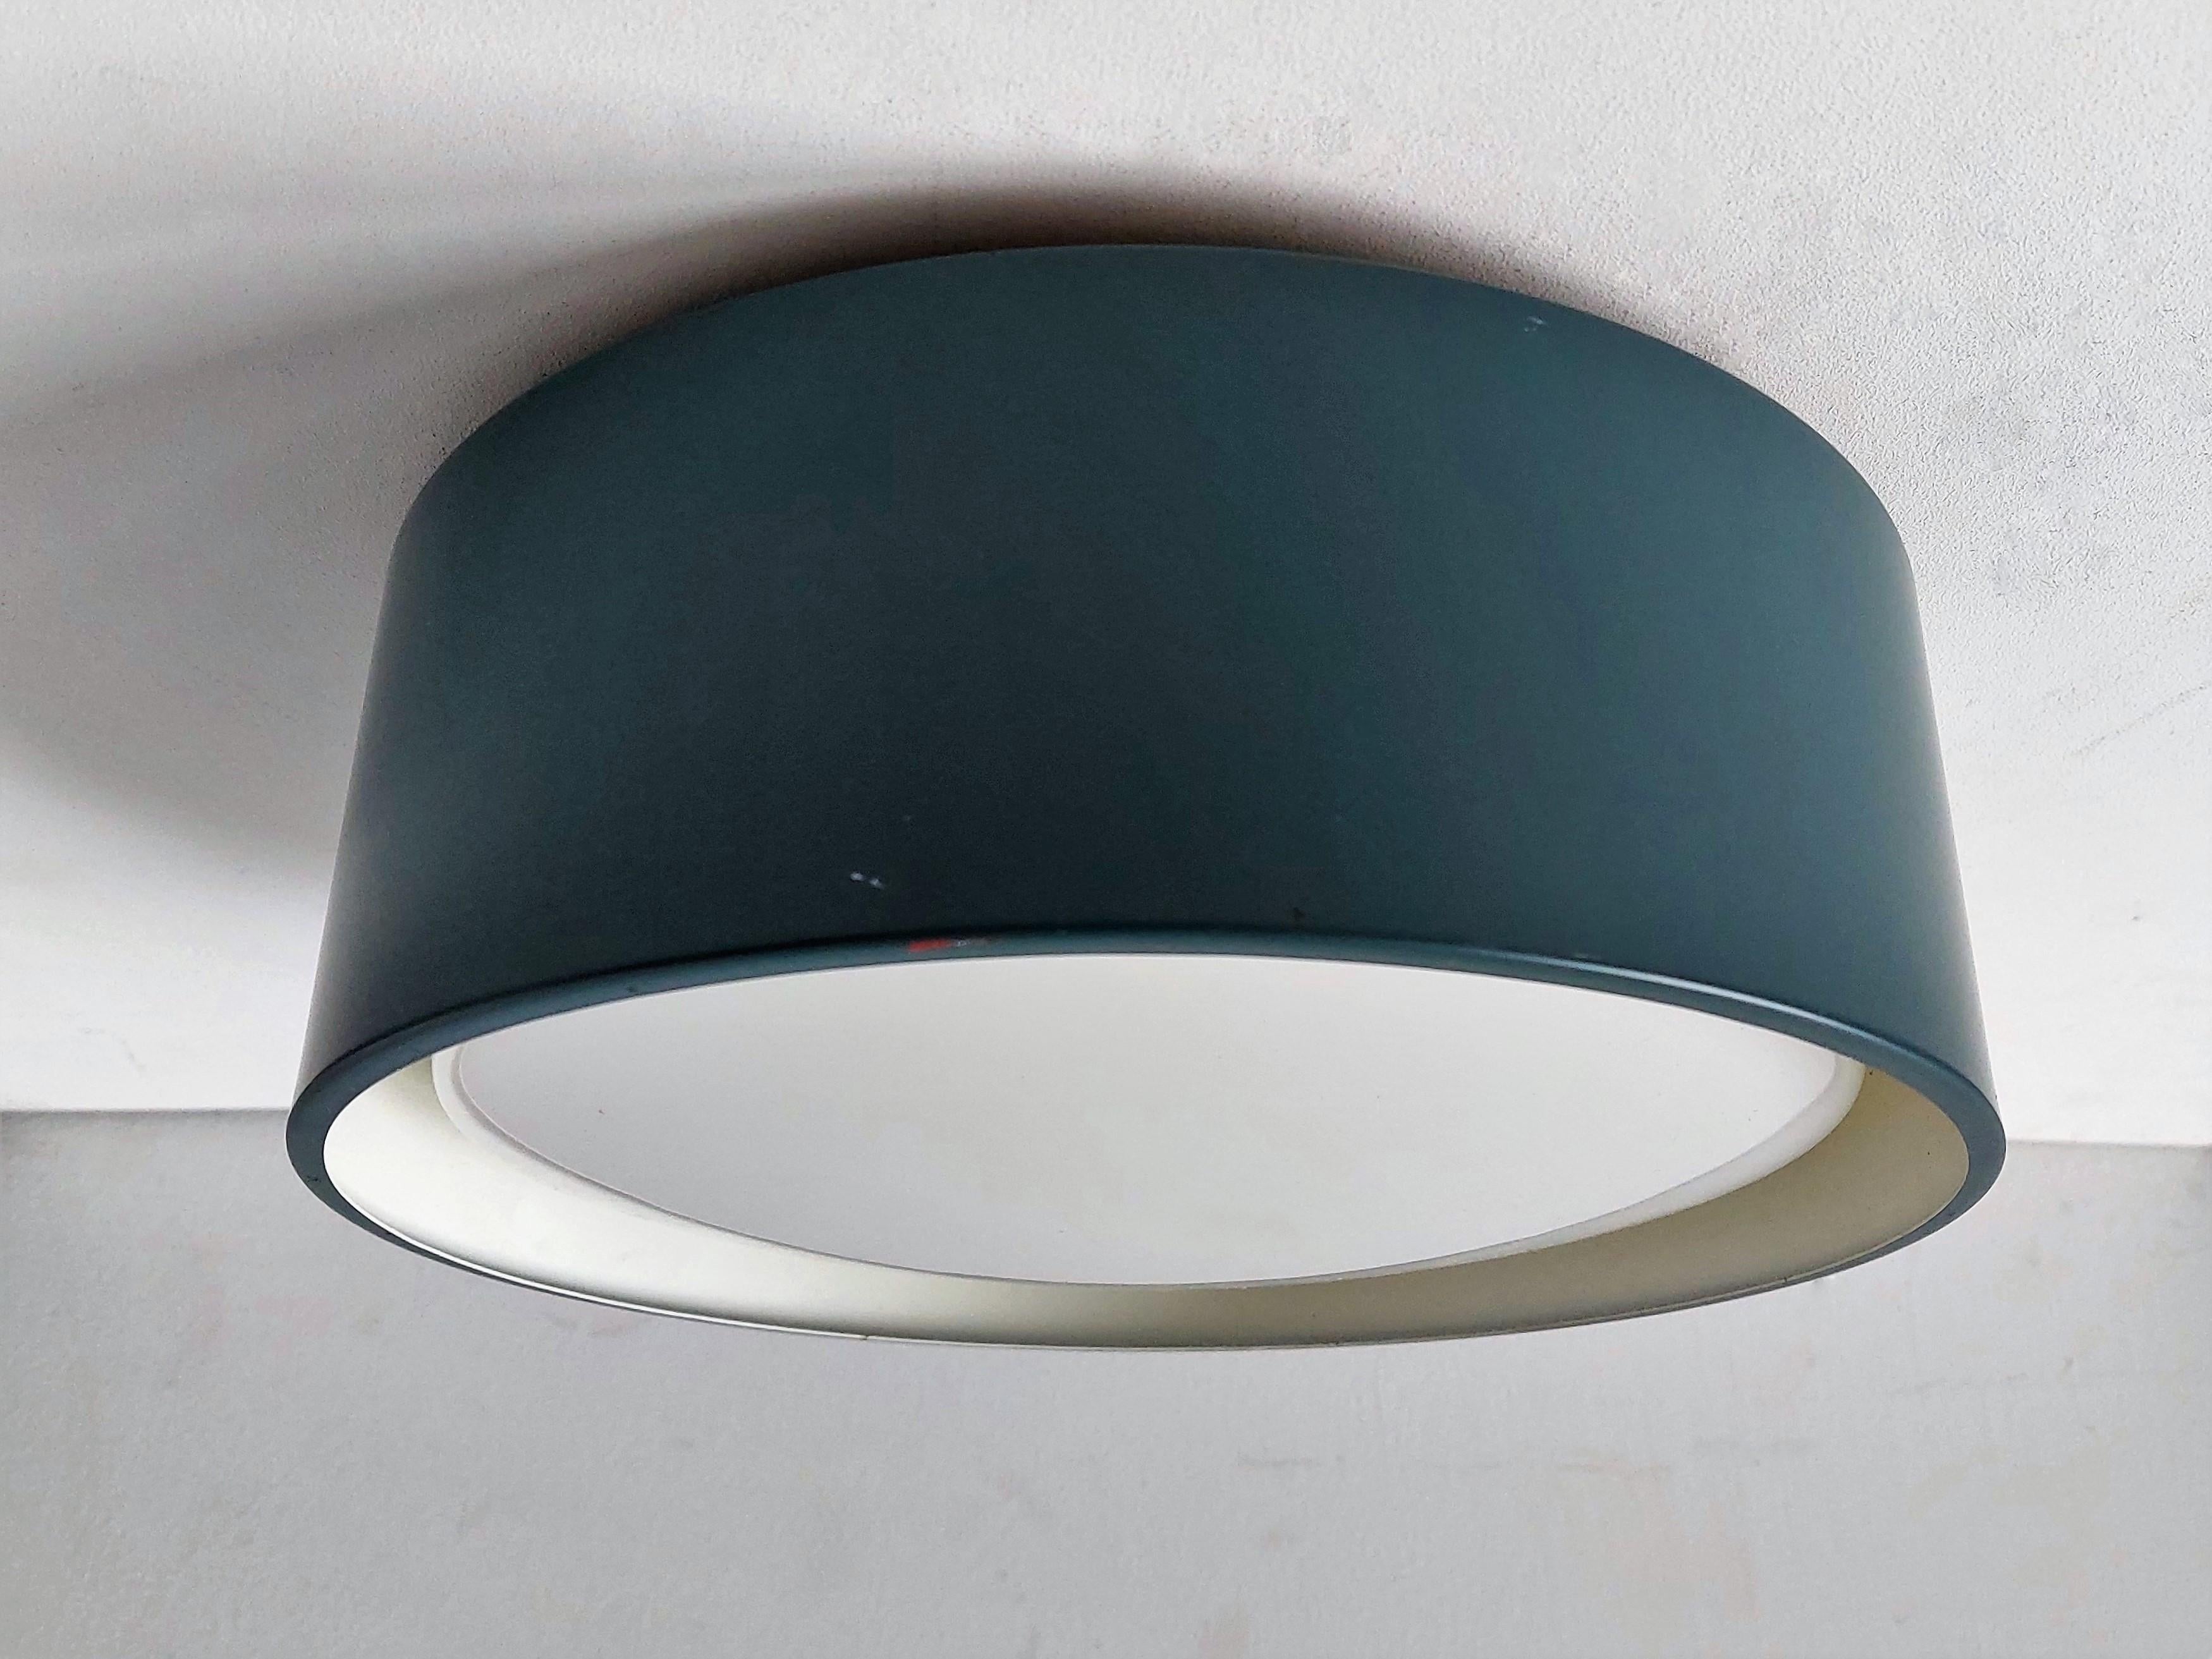 This ceiling lamp was designed by the architects Karen and Ebbe Clemmensen & Jørgen Bo for Fog & Mørup in the 1960's. It is part of the Blågård series and has a petrol blue original lacquered shade with an acrylic diffuser for a beautiful